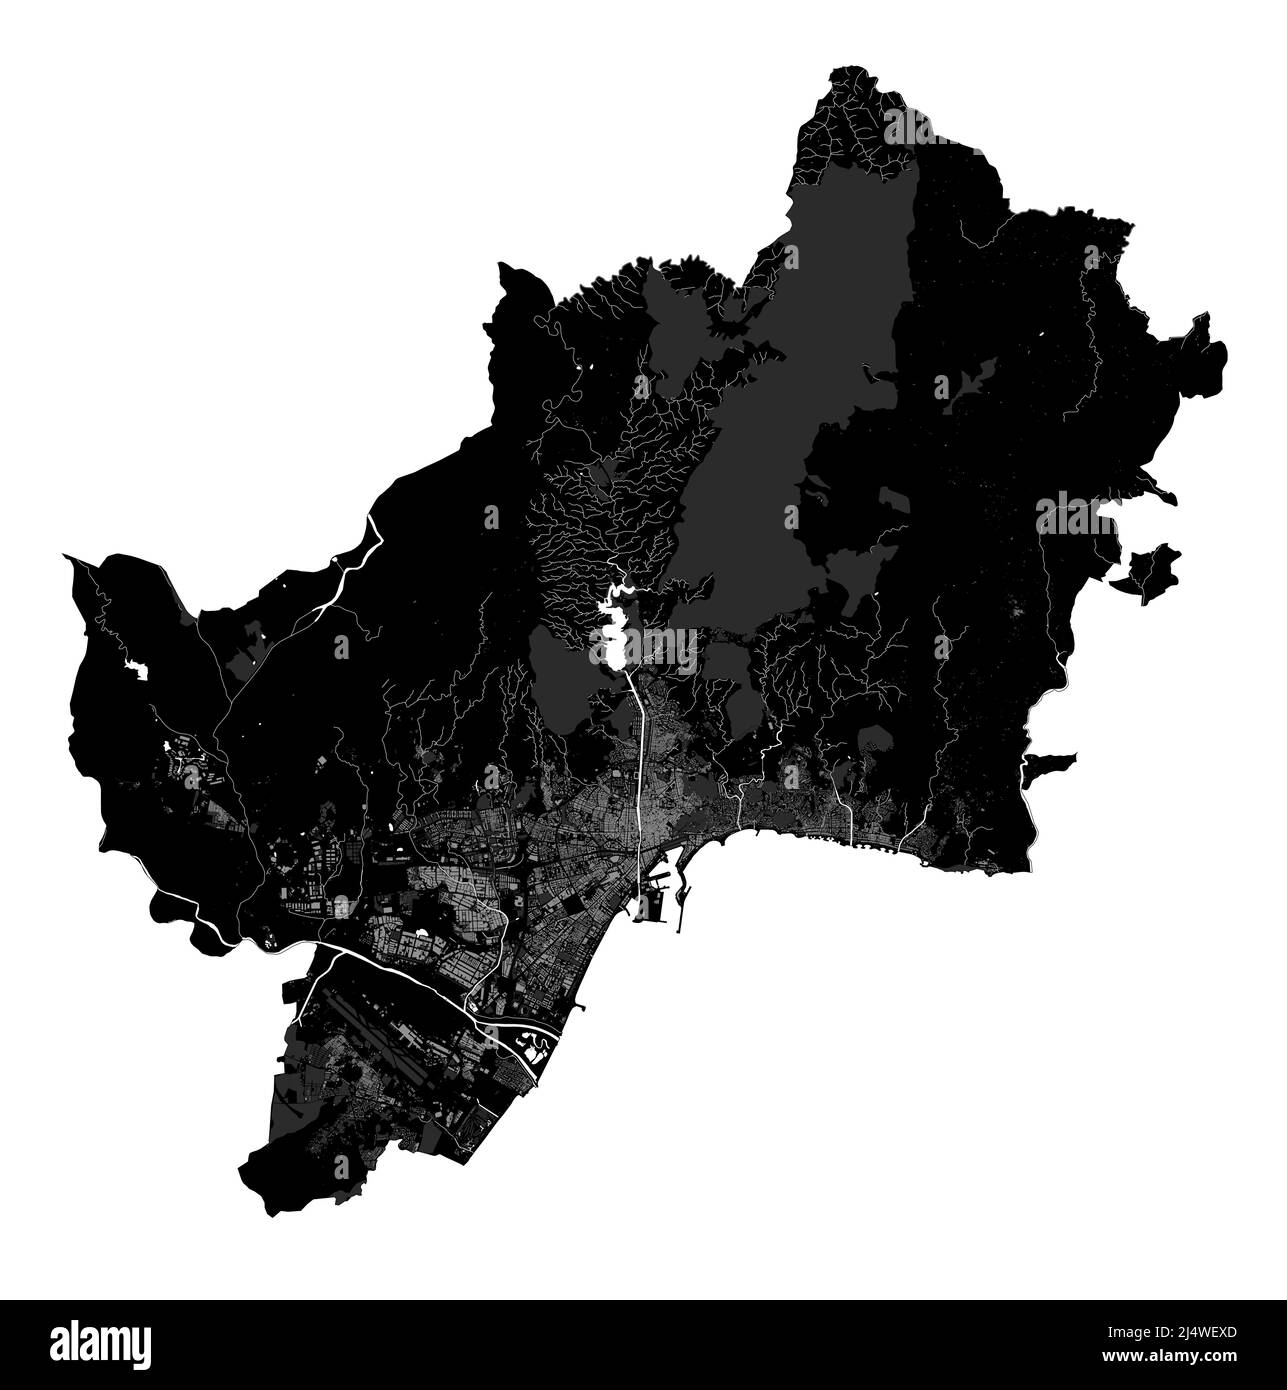 Malaga map. Detailed vector map of Malaga city administrative area. Cityscape poster metropolitan aria view. Black land with white streets, roads and Stock Vector